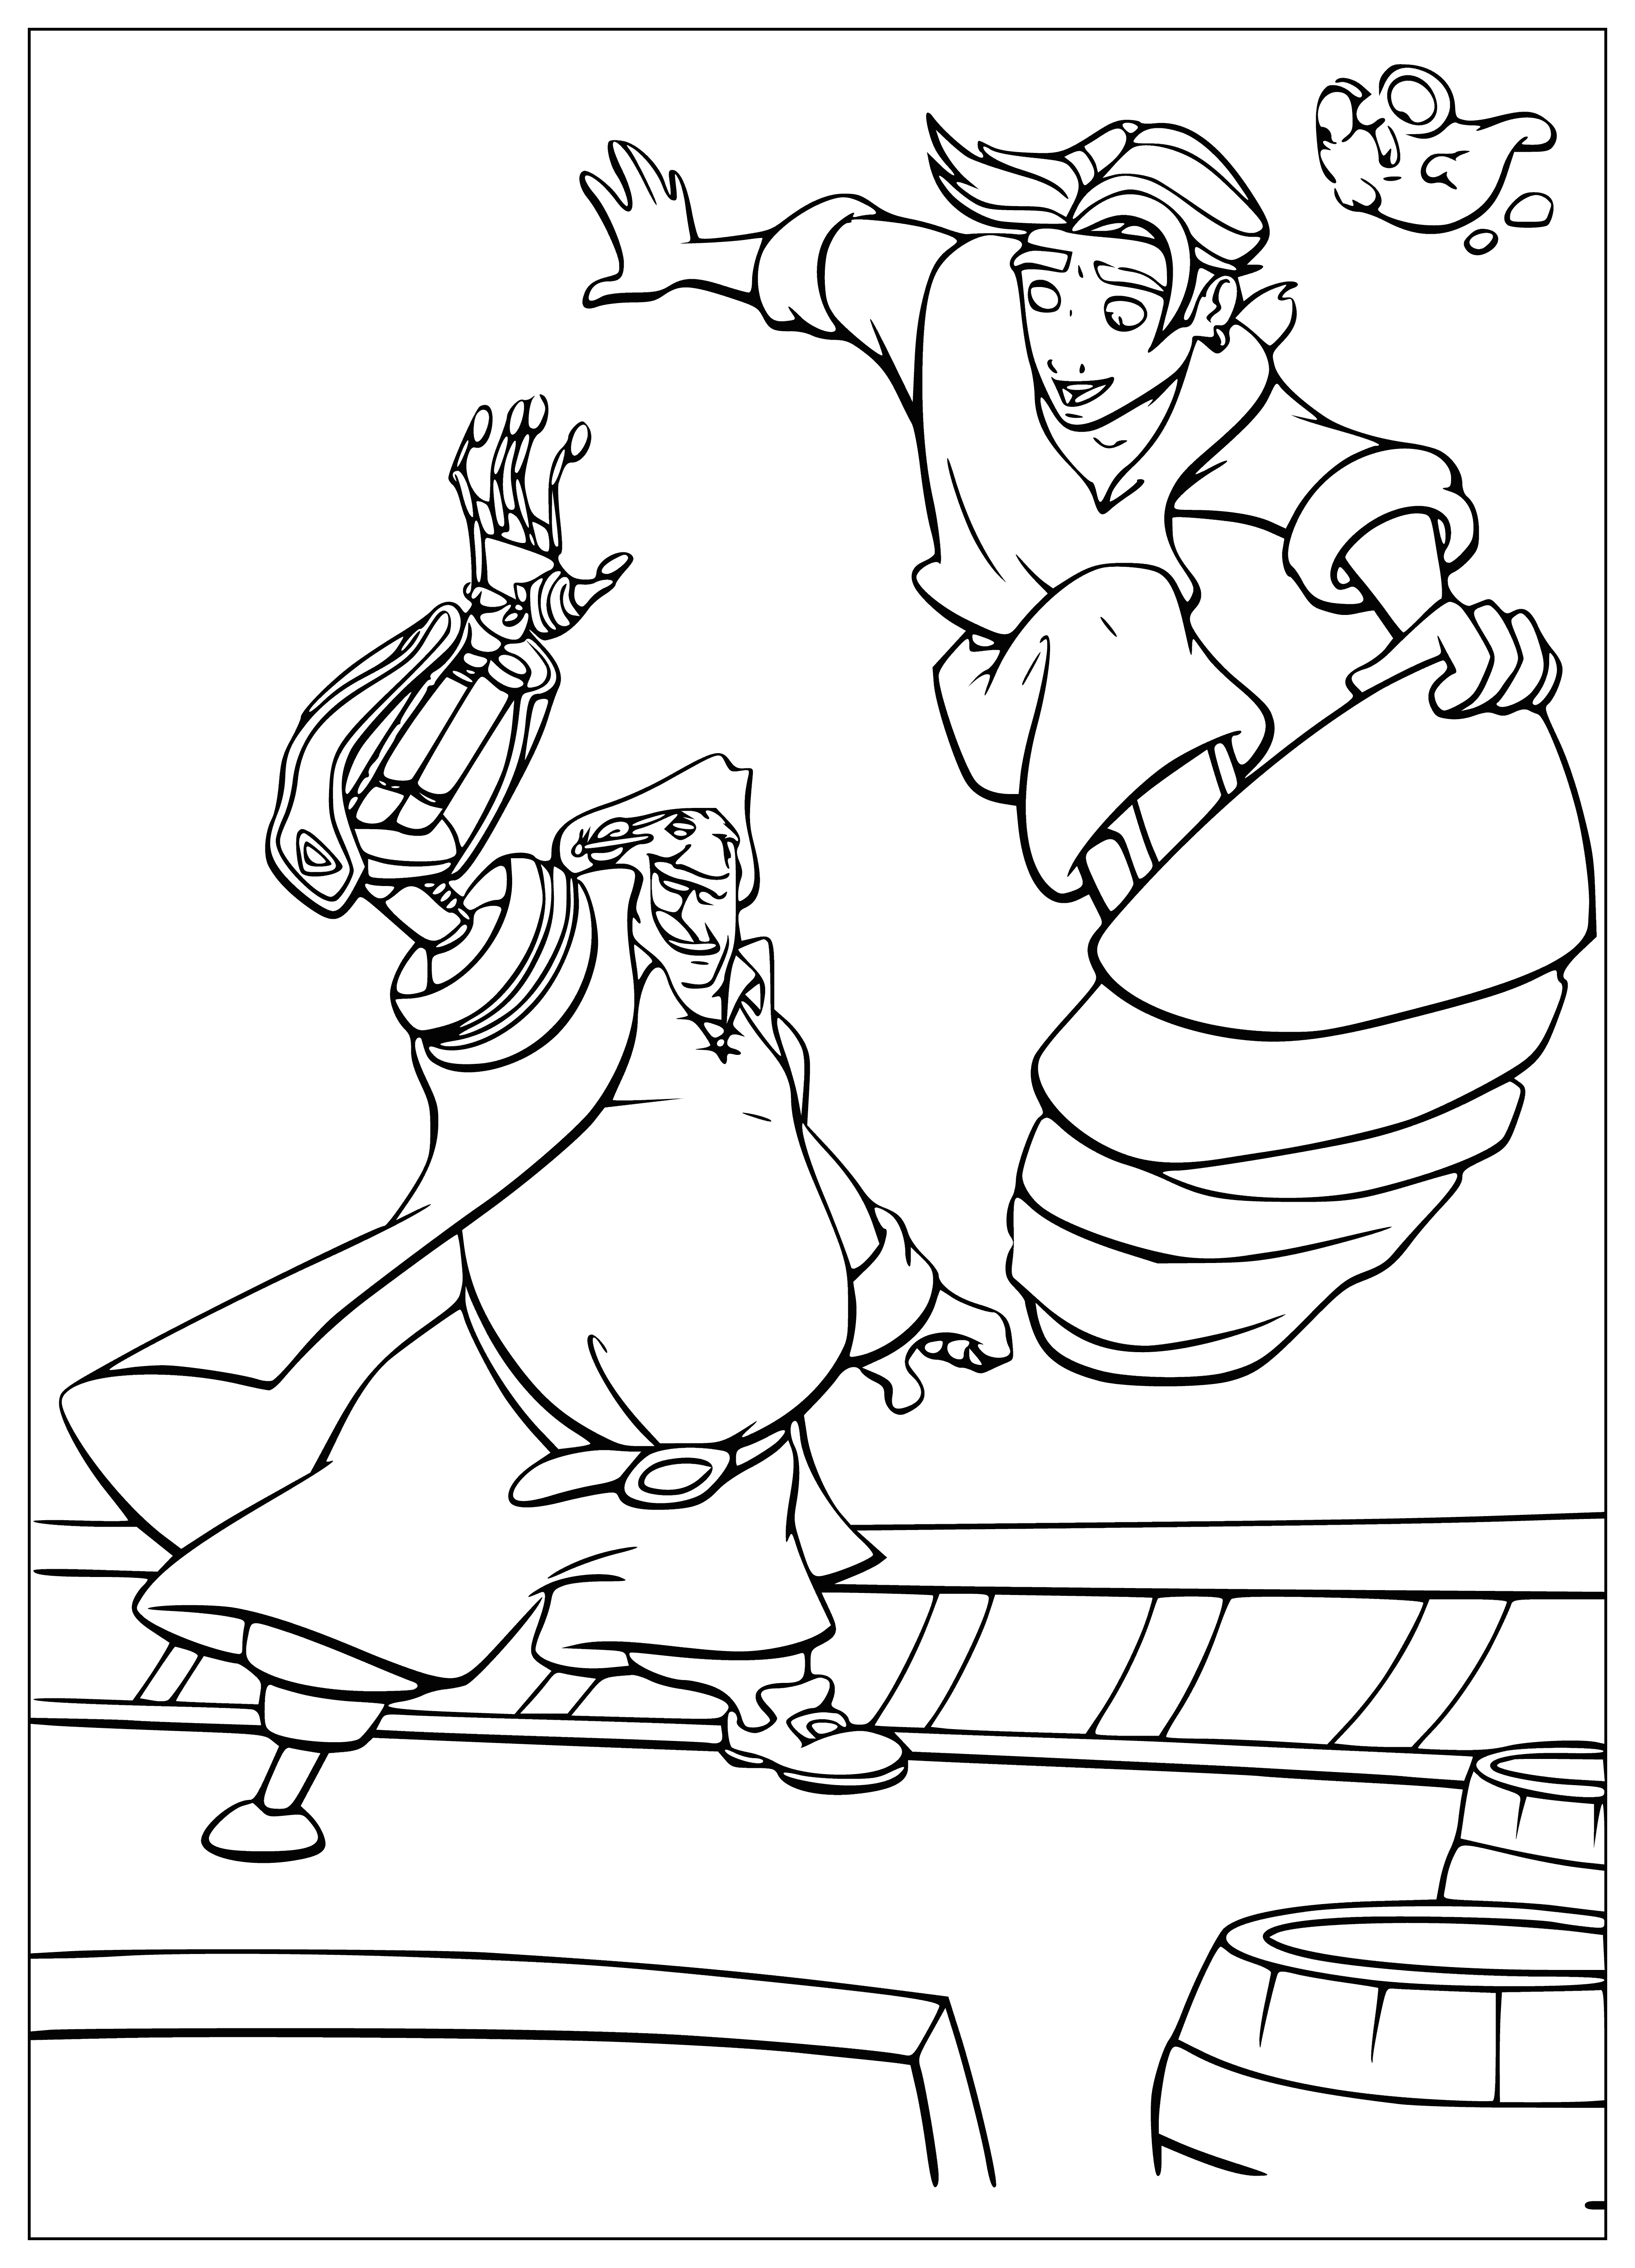 Flying board coloring page